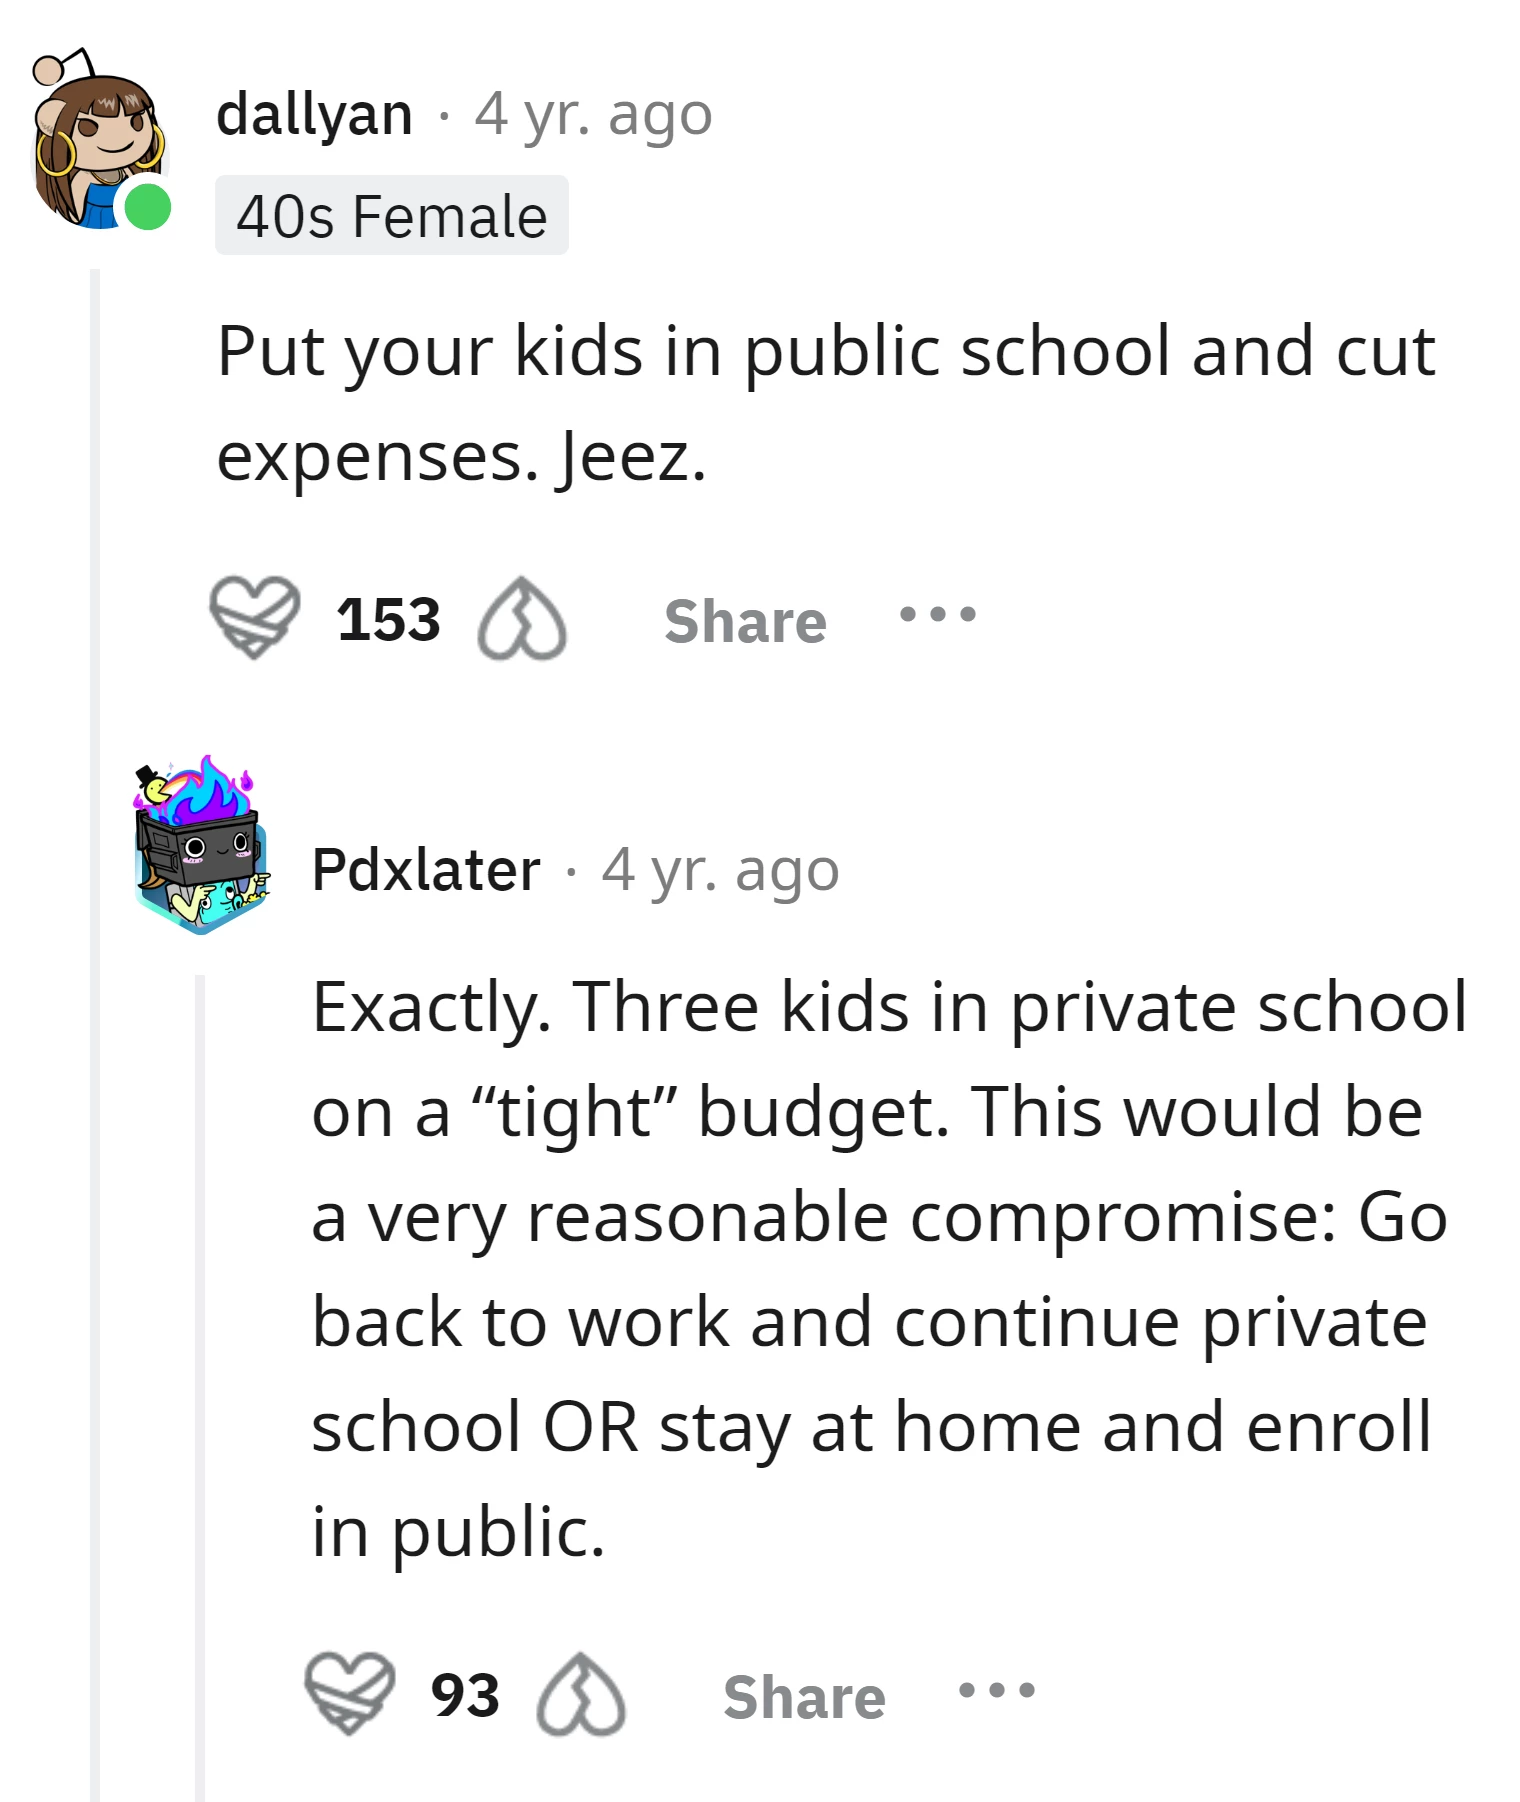 This Redditor also agree that OP should consider putting the kids in public school to alleviate financial strain